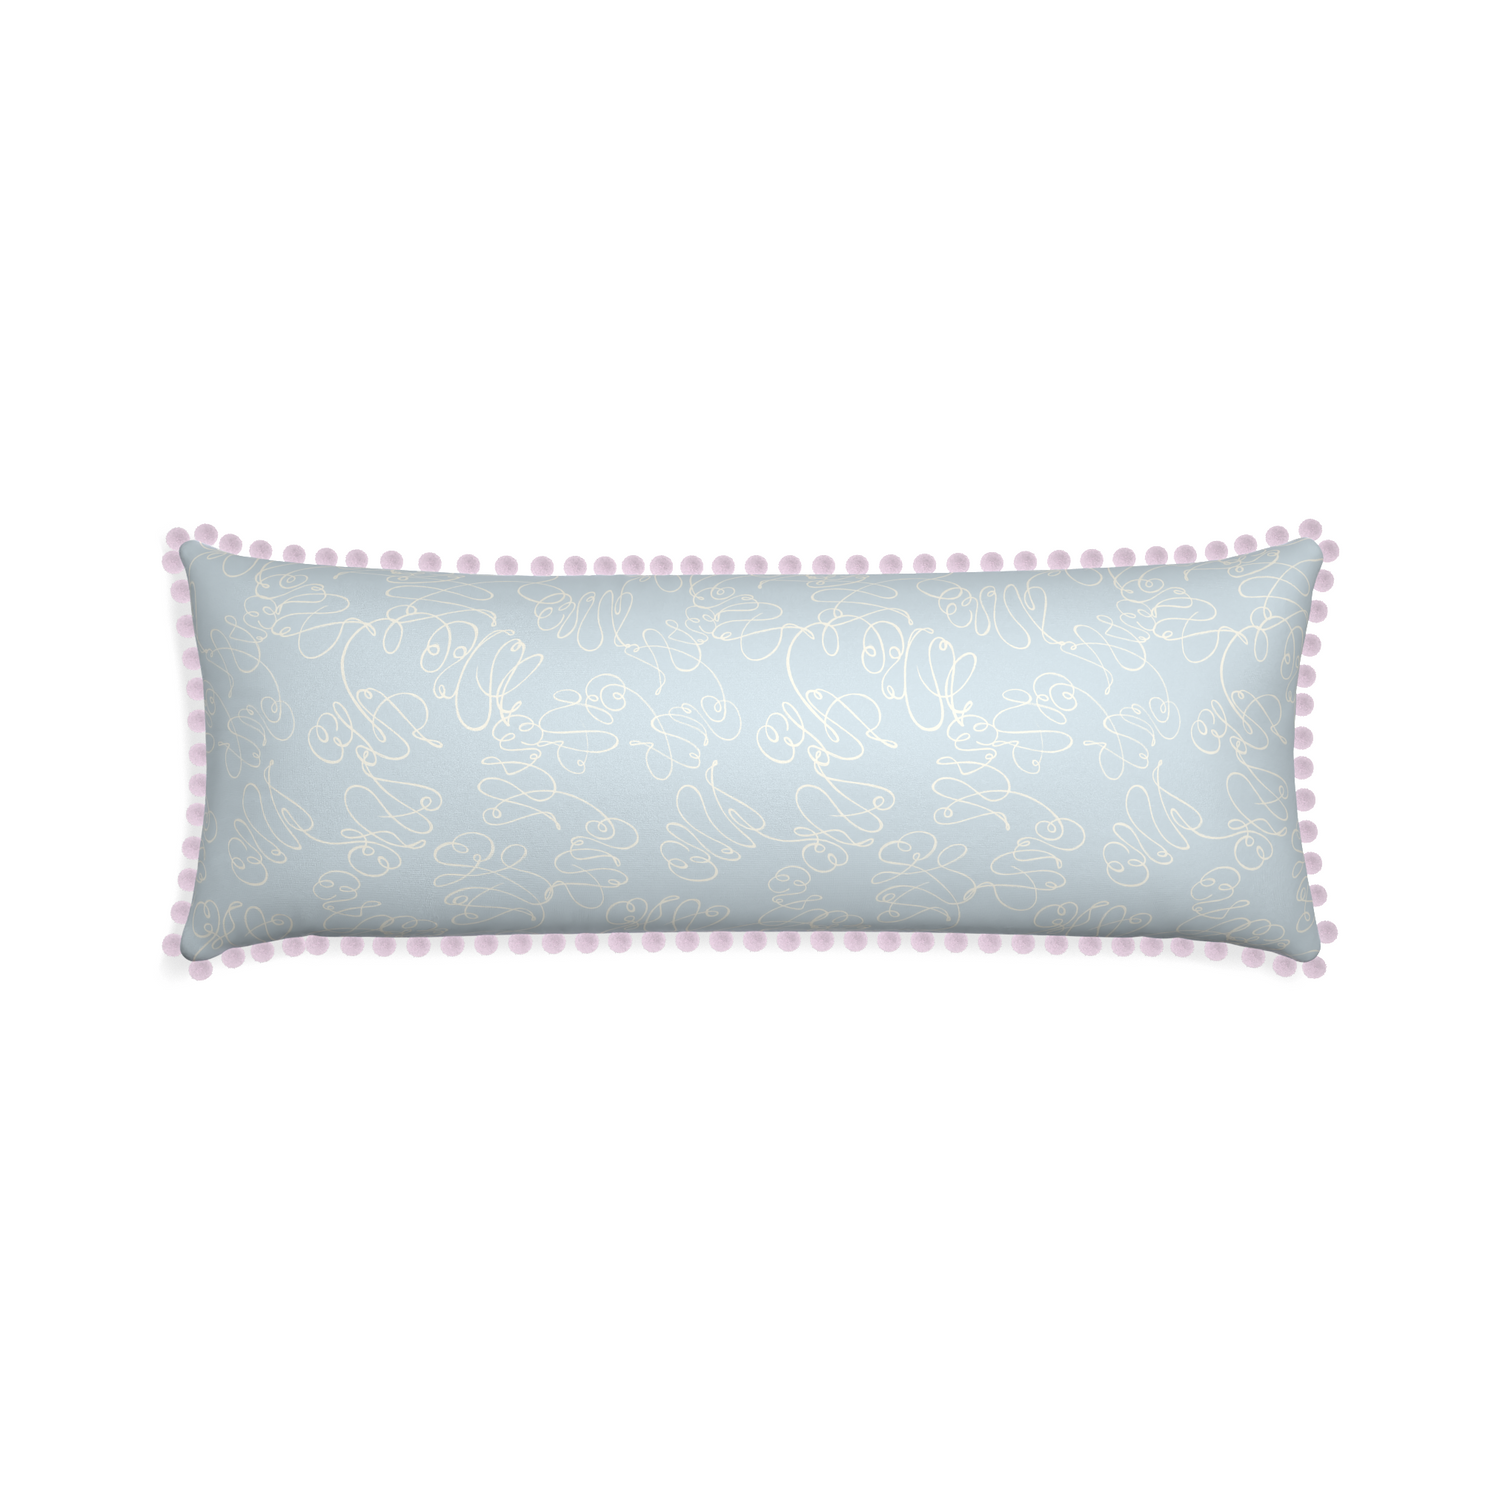 Xl-lumbar mirabella custom powder blue abstractpillow with l on white background